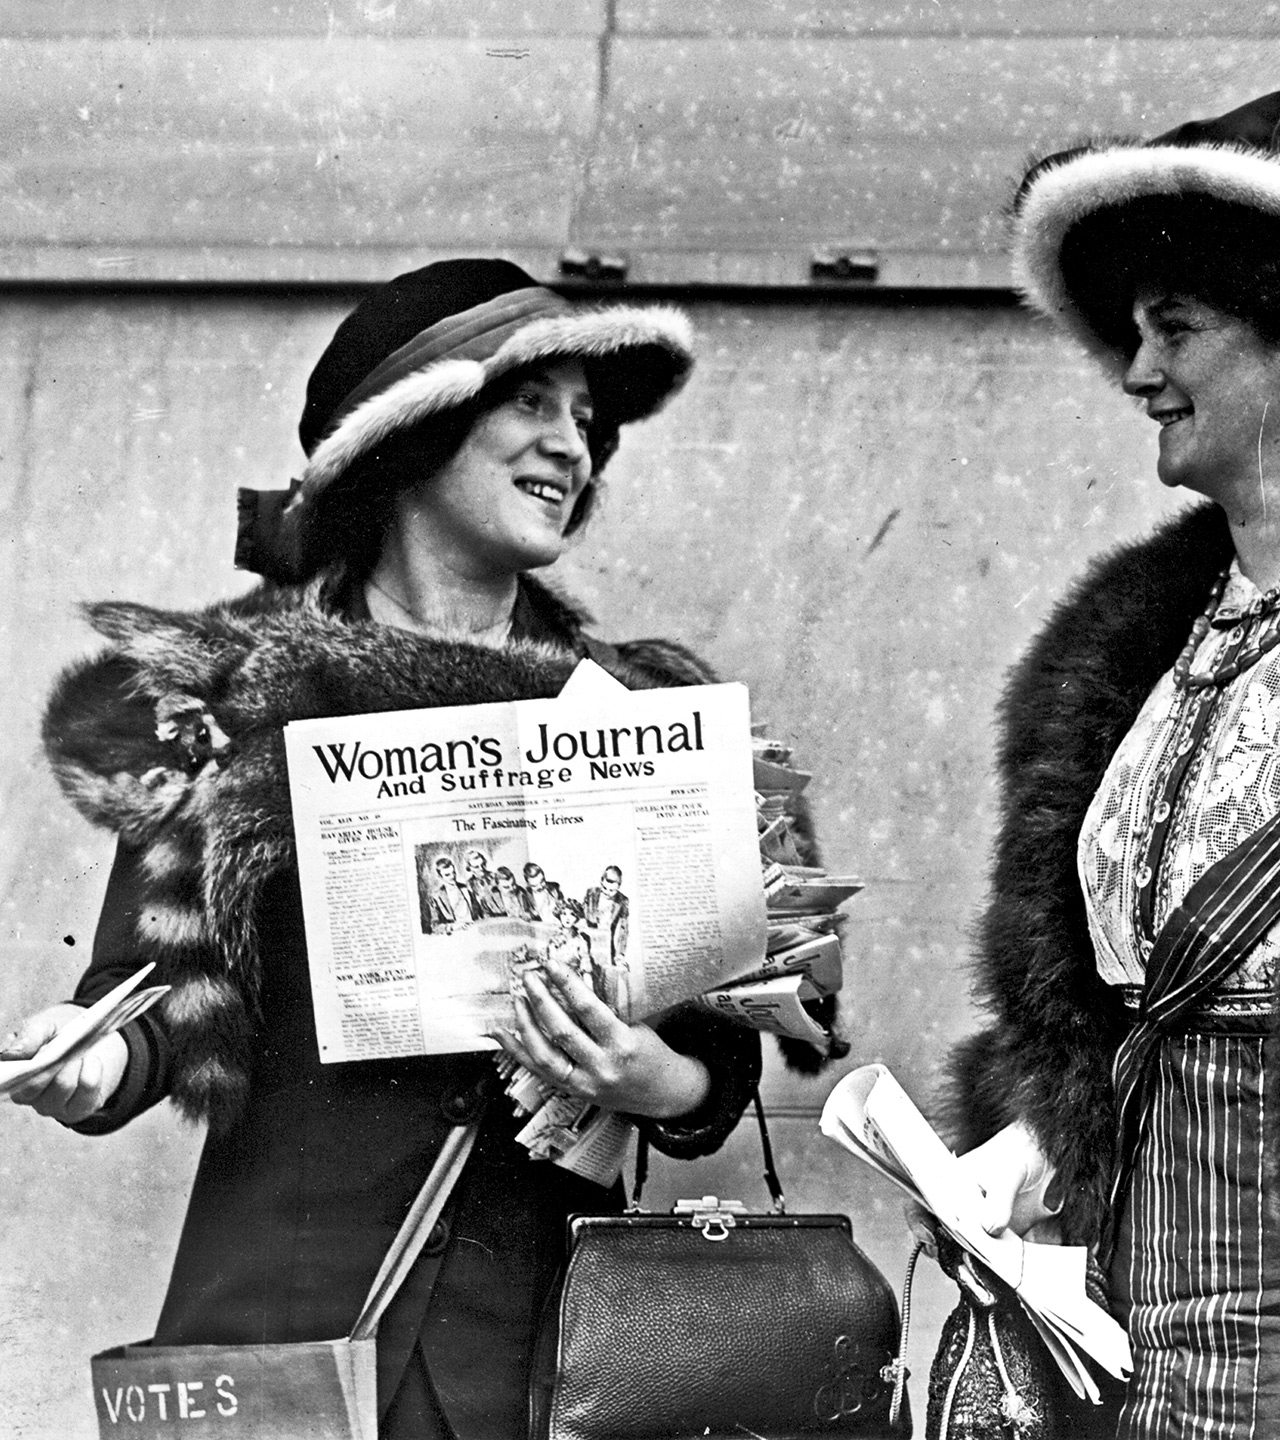 [Suffragist Margaret Foley distributing the Woman's Journal and Suffrage News]